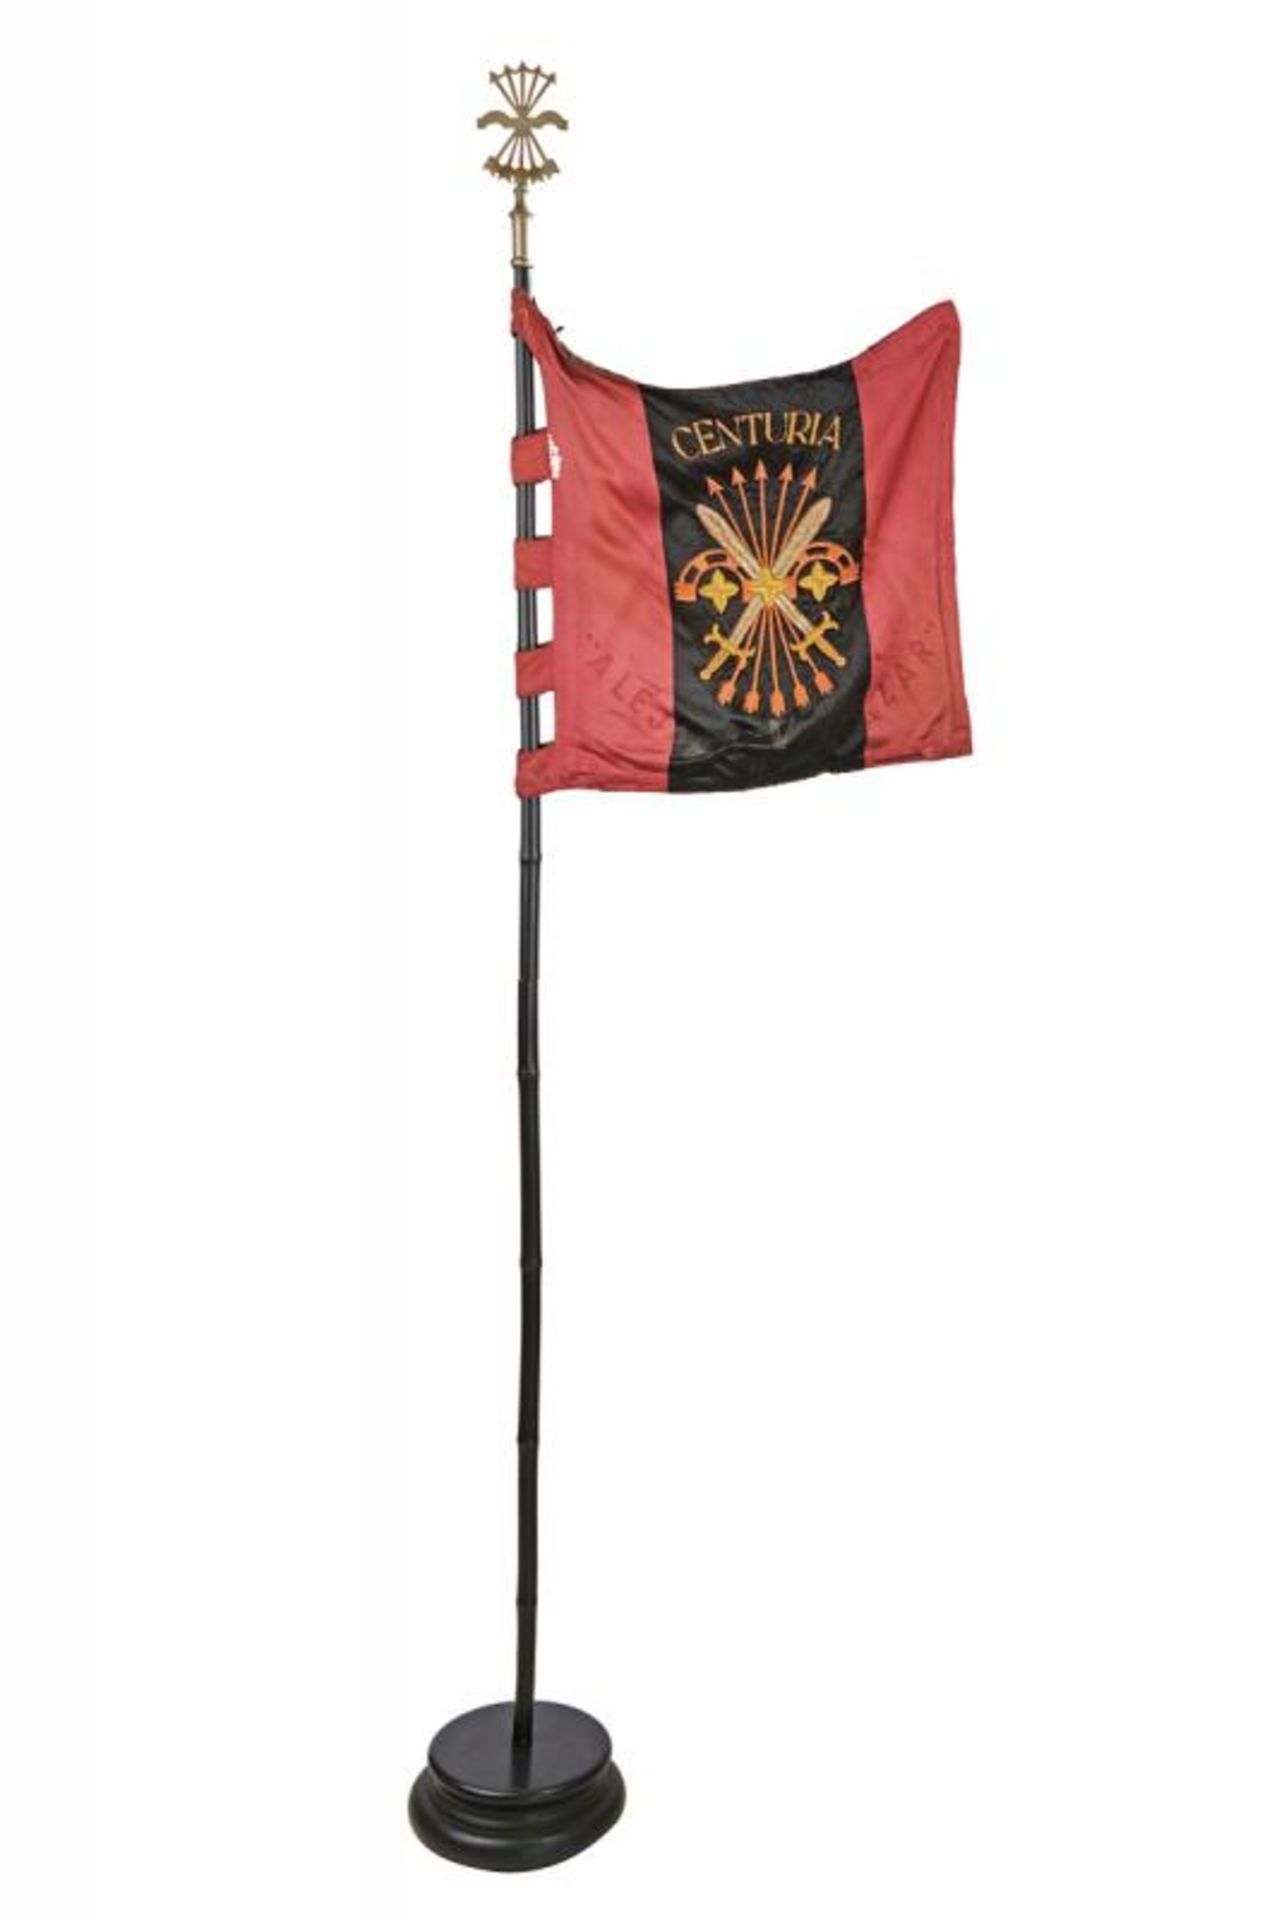 A 'Falange' flag with Madrid Coat of Arms